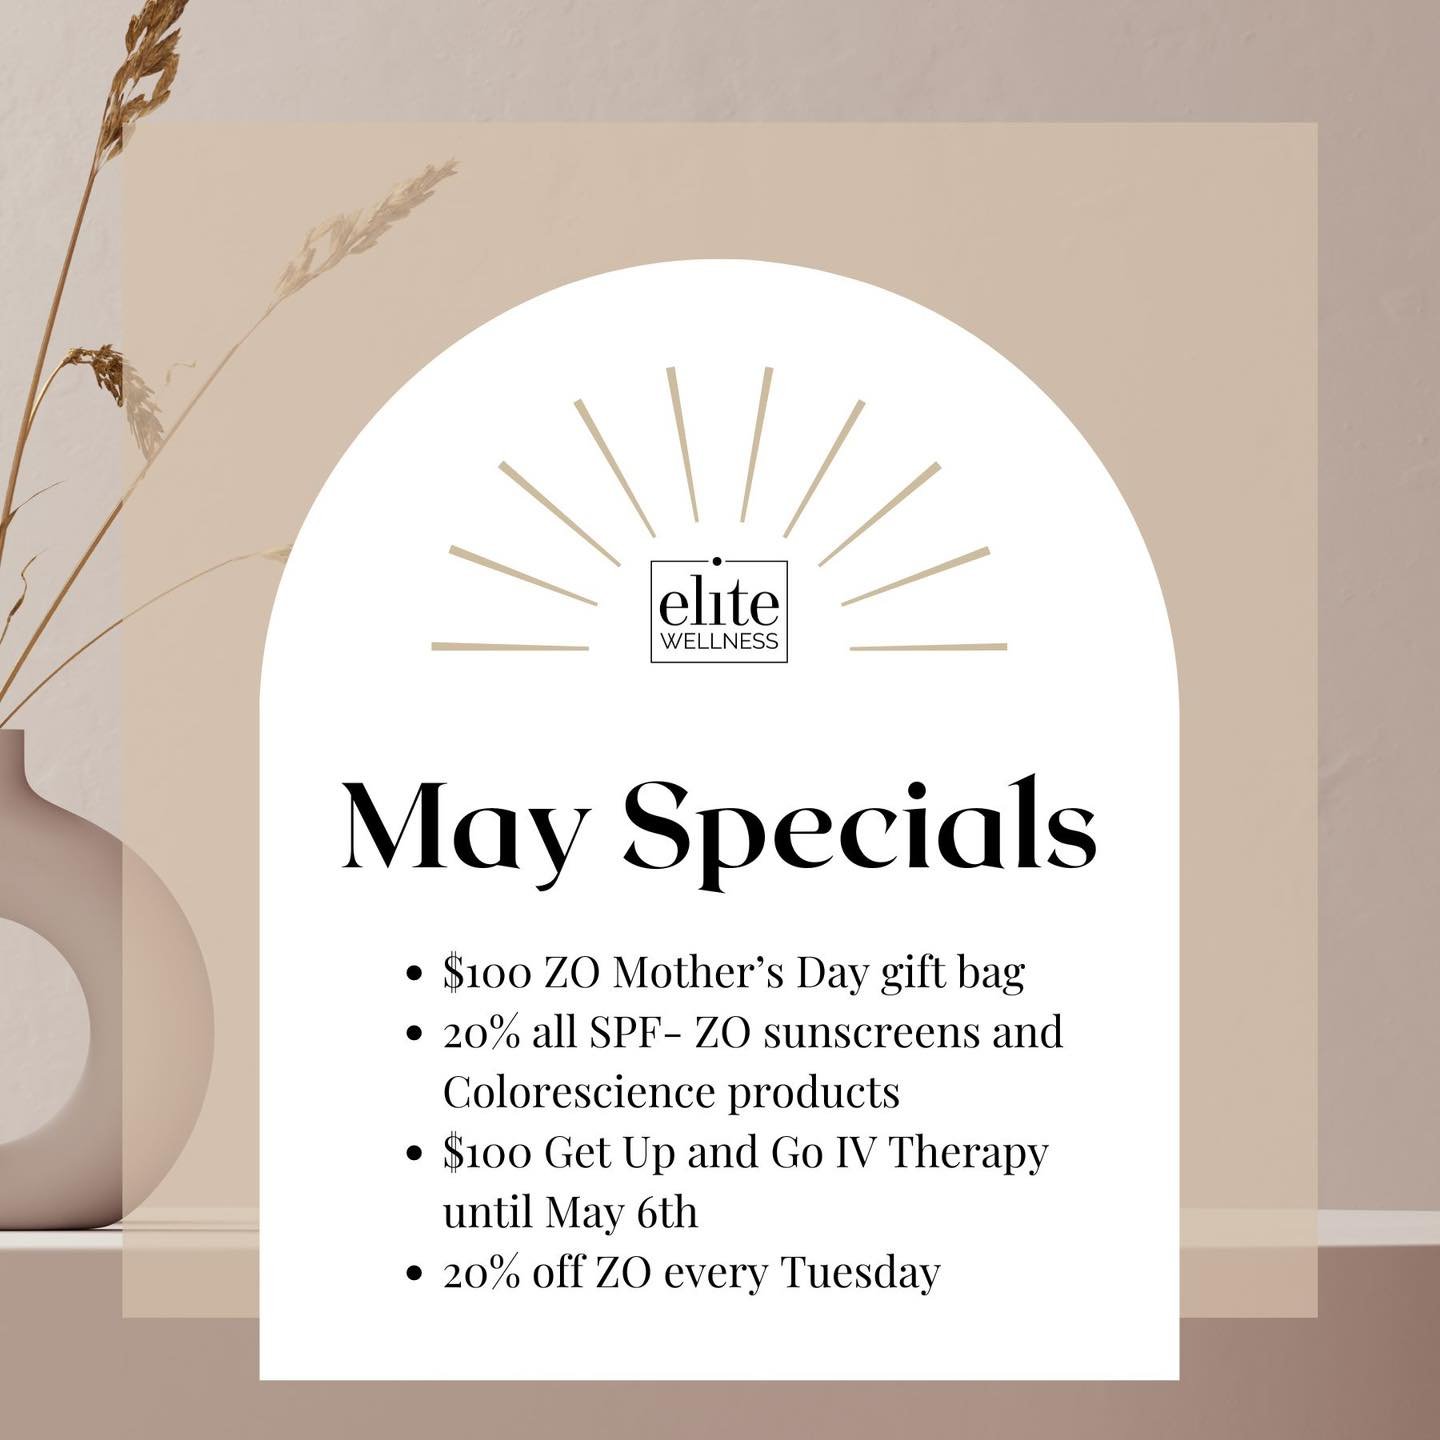 A new month brings new sales and specials! PSA 🚨 Mother&rsquo;s Day is in 10 days!!! We have an easy gift to make any mom smile. ZO gift bags for only $100.

Also call soon to take advantage of the $100 Get Up and Go IV special! Deal expires May 6th